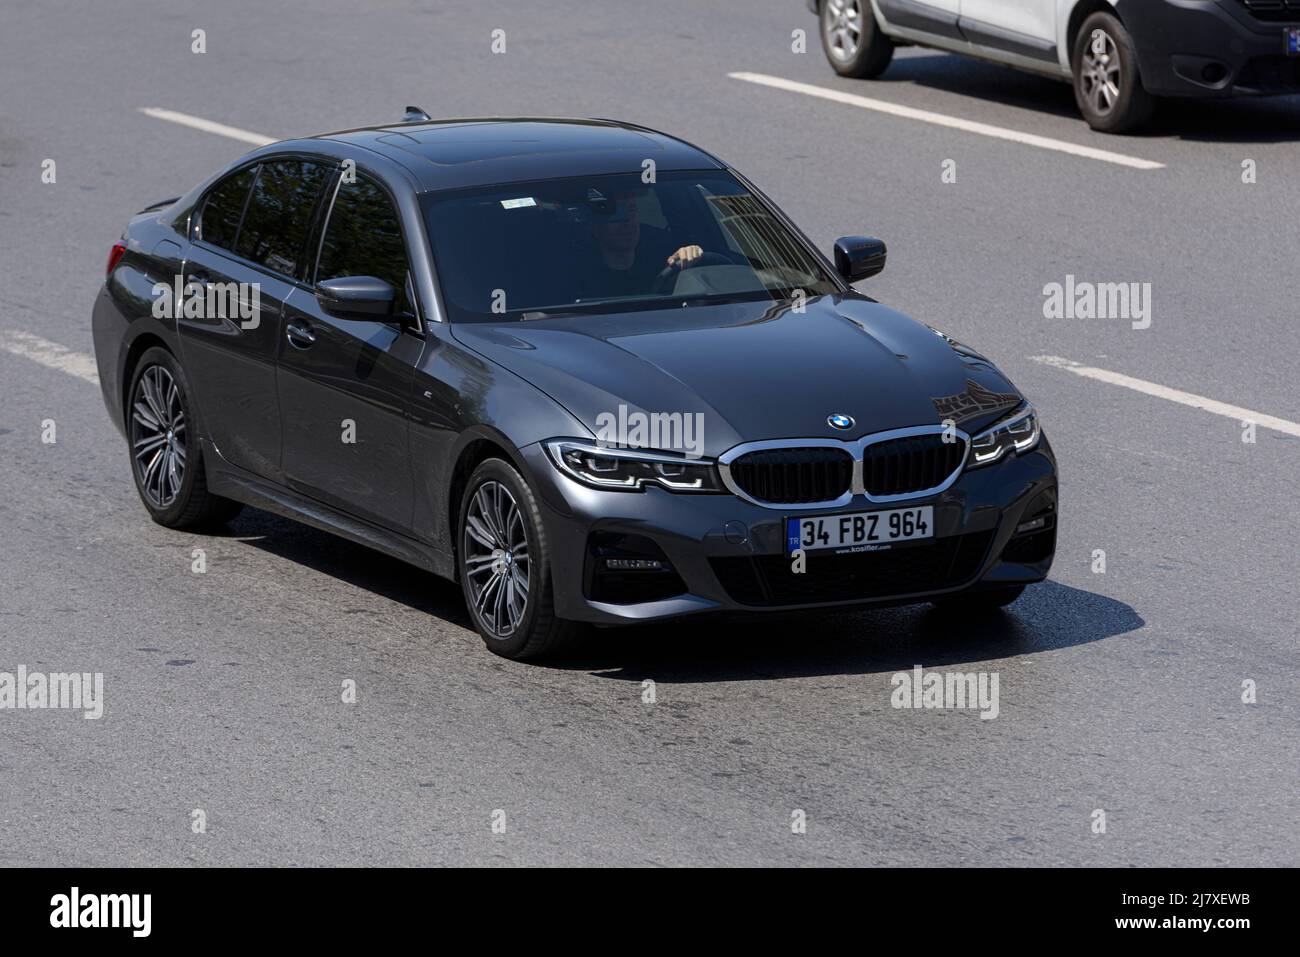 ISTANBUL, TURKEY - APRIL 19, 2022: BMW 520 is a range of executive cars manufactured by German automaker BMW in various engine and body configurations Stock Photo